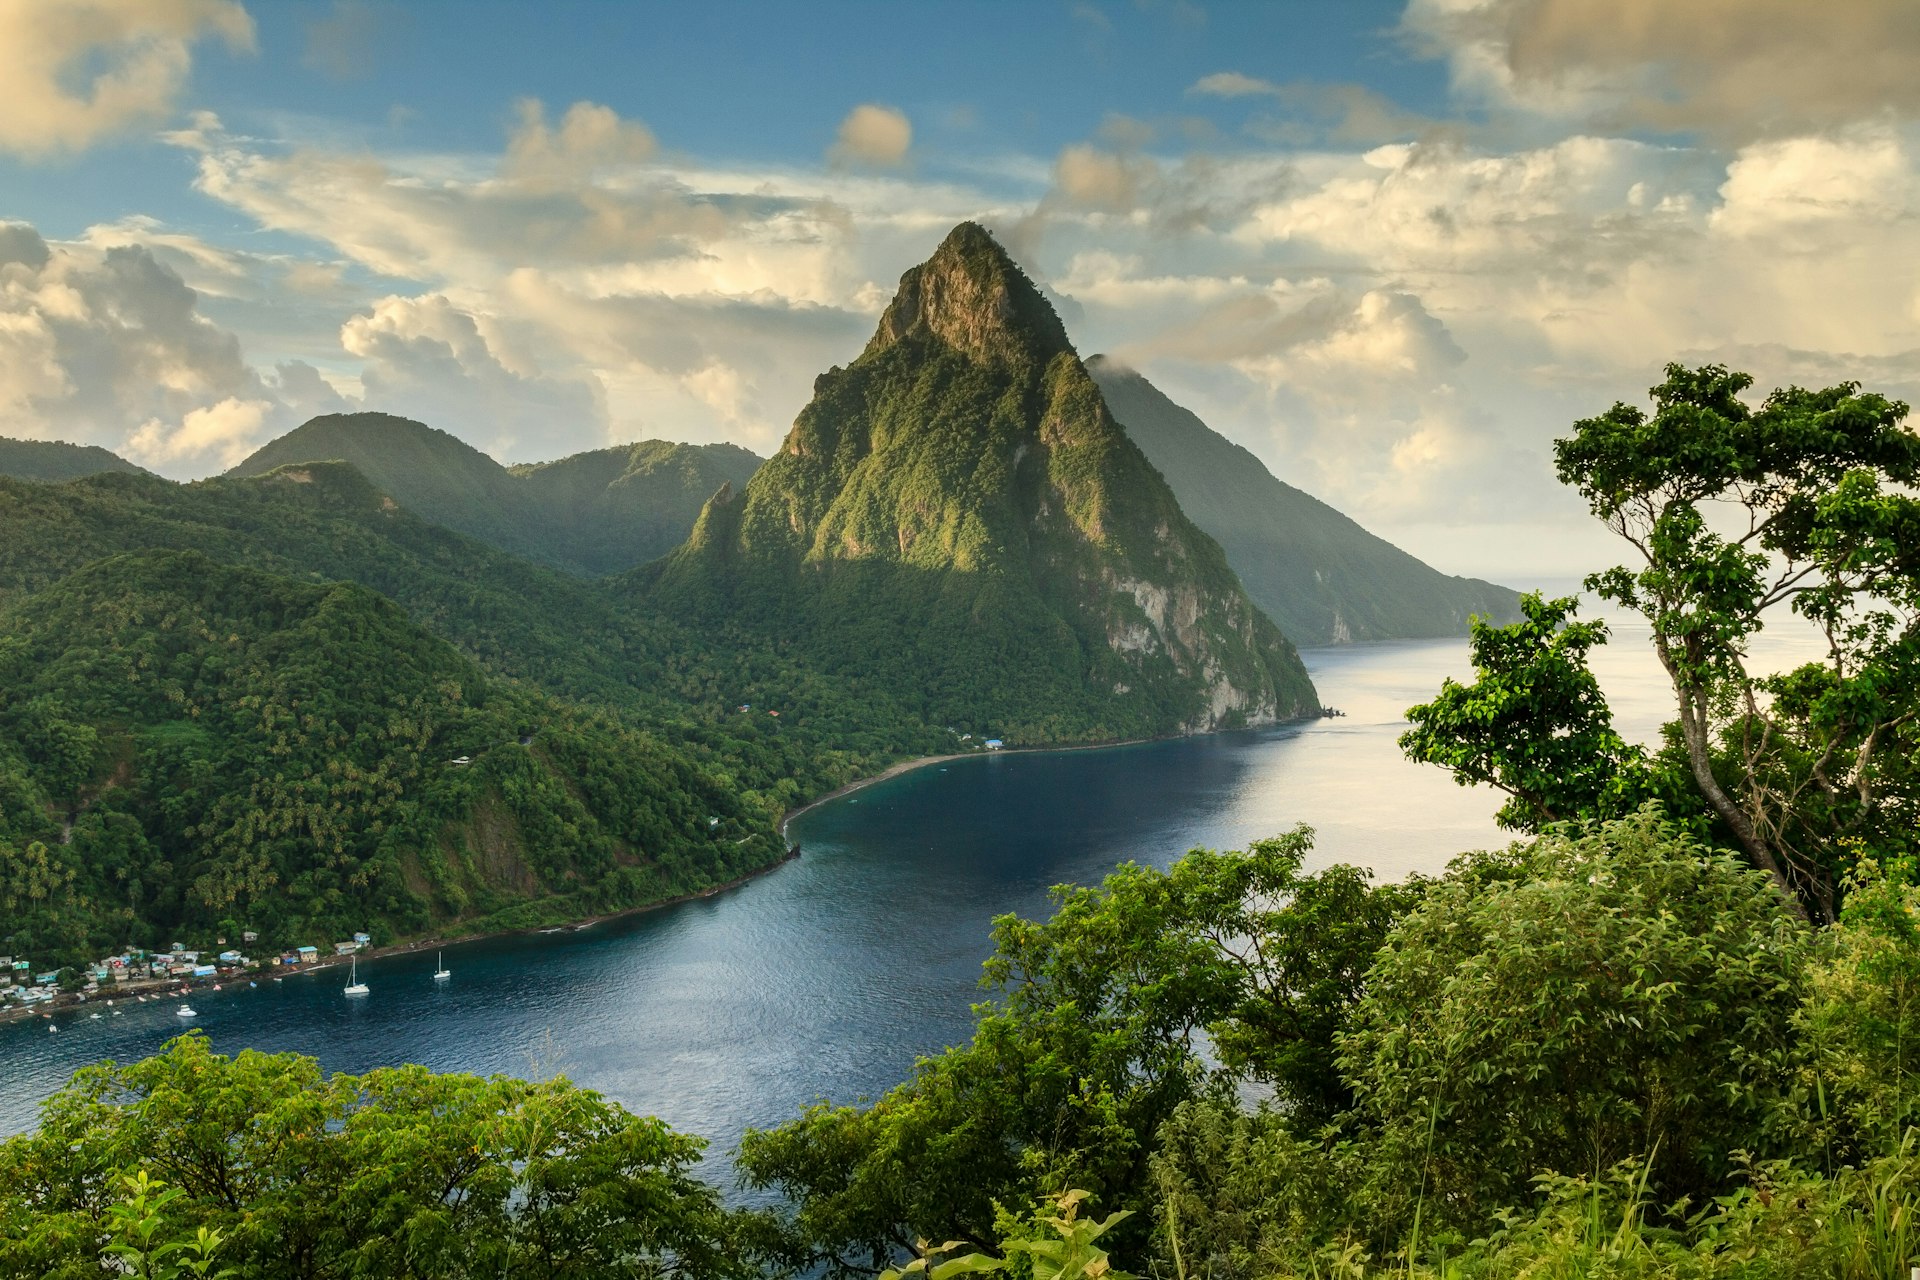 View of St. Lucia's Pitons (Petit Piton & Gros Piton) from an elevated viewpoint with the lush green rainforest and deep blue bay of Soufrière in the foreground. 